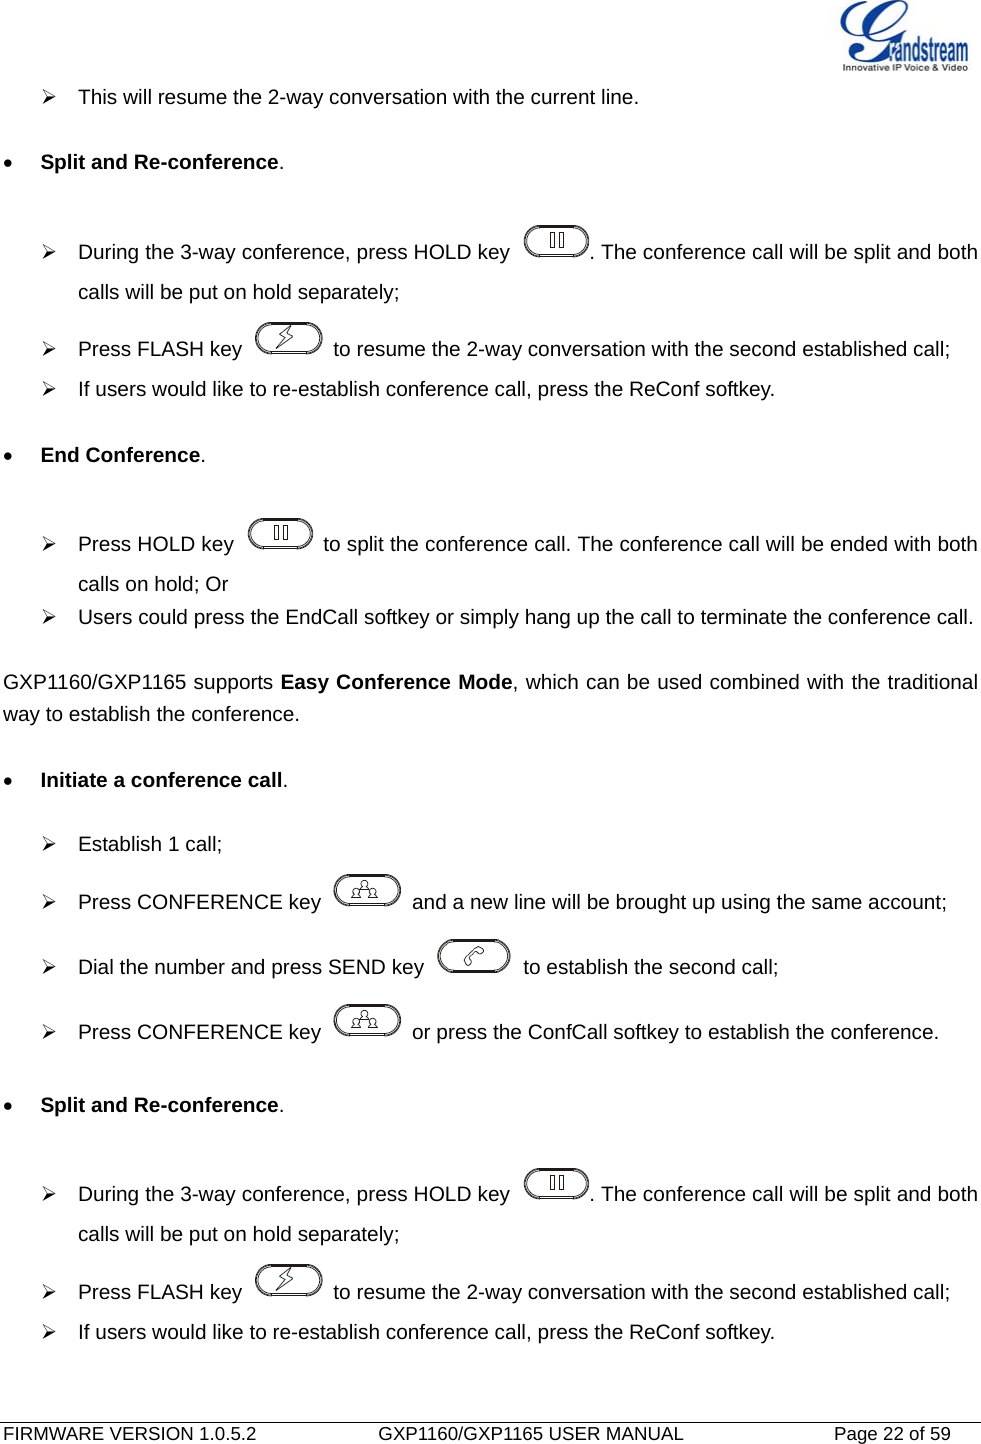   FIRMWARE VERSION 1.0.5.2             GXP1160/GXP1165 USER MANUAL           Page 22 of 59                                     This will resume the 2-way conversation with the current line.    Split and Re-conference.    During the 3-way conference, press HOLD key  . The conference call will be split and both calls will be put on hold separately;   Press FLASH key    to resume the 2-way conversation with the second established call;   If users would like to re-establish conference call, press the ReConf softkey.   End Conference.    Press HOLD key    to split the conference call. The conference call will be ended with both calls on hold; Or   Users could press the EndCall softkey or simply hang up the call to terminate the conference call.  GXP1160/GXP1165 supports Easy Conference Mode, which can be used combined with the traditional way to establish the conference.   Initiate a conference call.    Establish 1 call;   Press CONFERENCE key    and a new line will be brought up using the same account;   Dial the number and press SEND key    to establish the second call;   Press CONFERENCE key    or press the ConfCall softkey to establish the conference.   Split and Re-conference.    During the 3-way conference, press HOLD key  . The conference call will be split and both calls will be put on hold separately;   Press FLASH key    to resume the 2-way conversation with the second established call;   If users would like to re-establish conference call, press the ReConf softkey.   